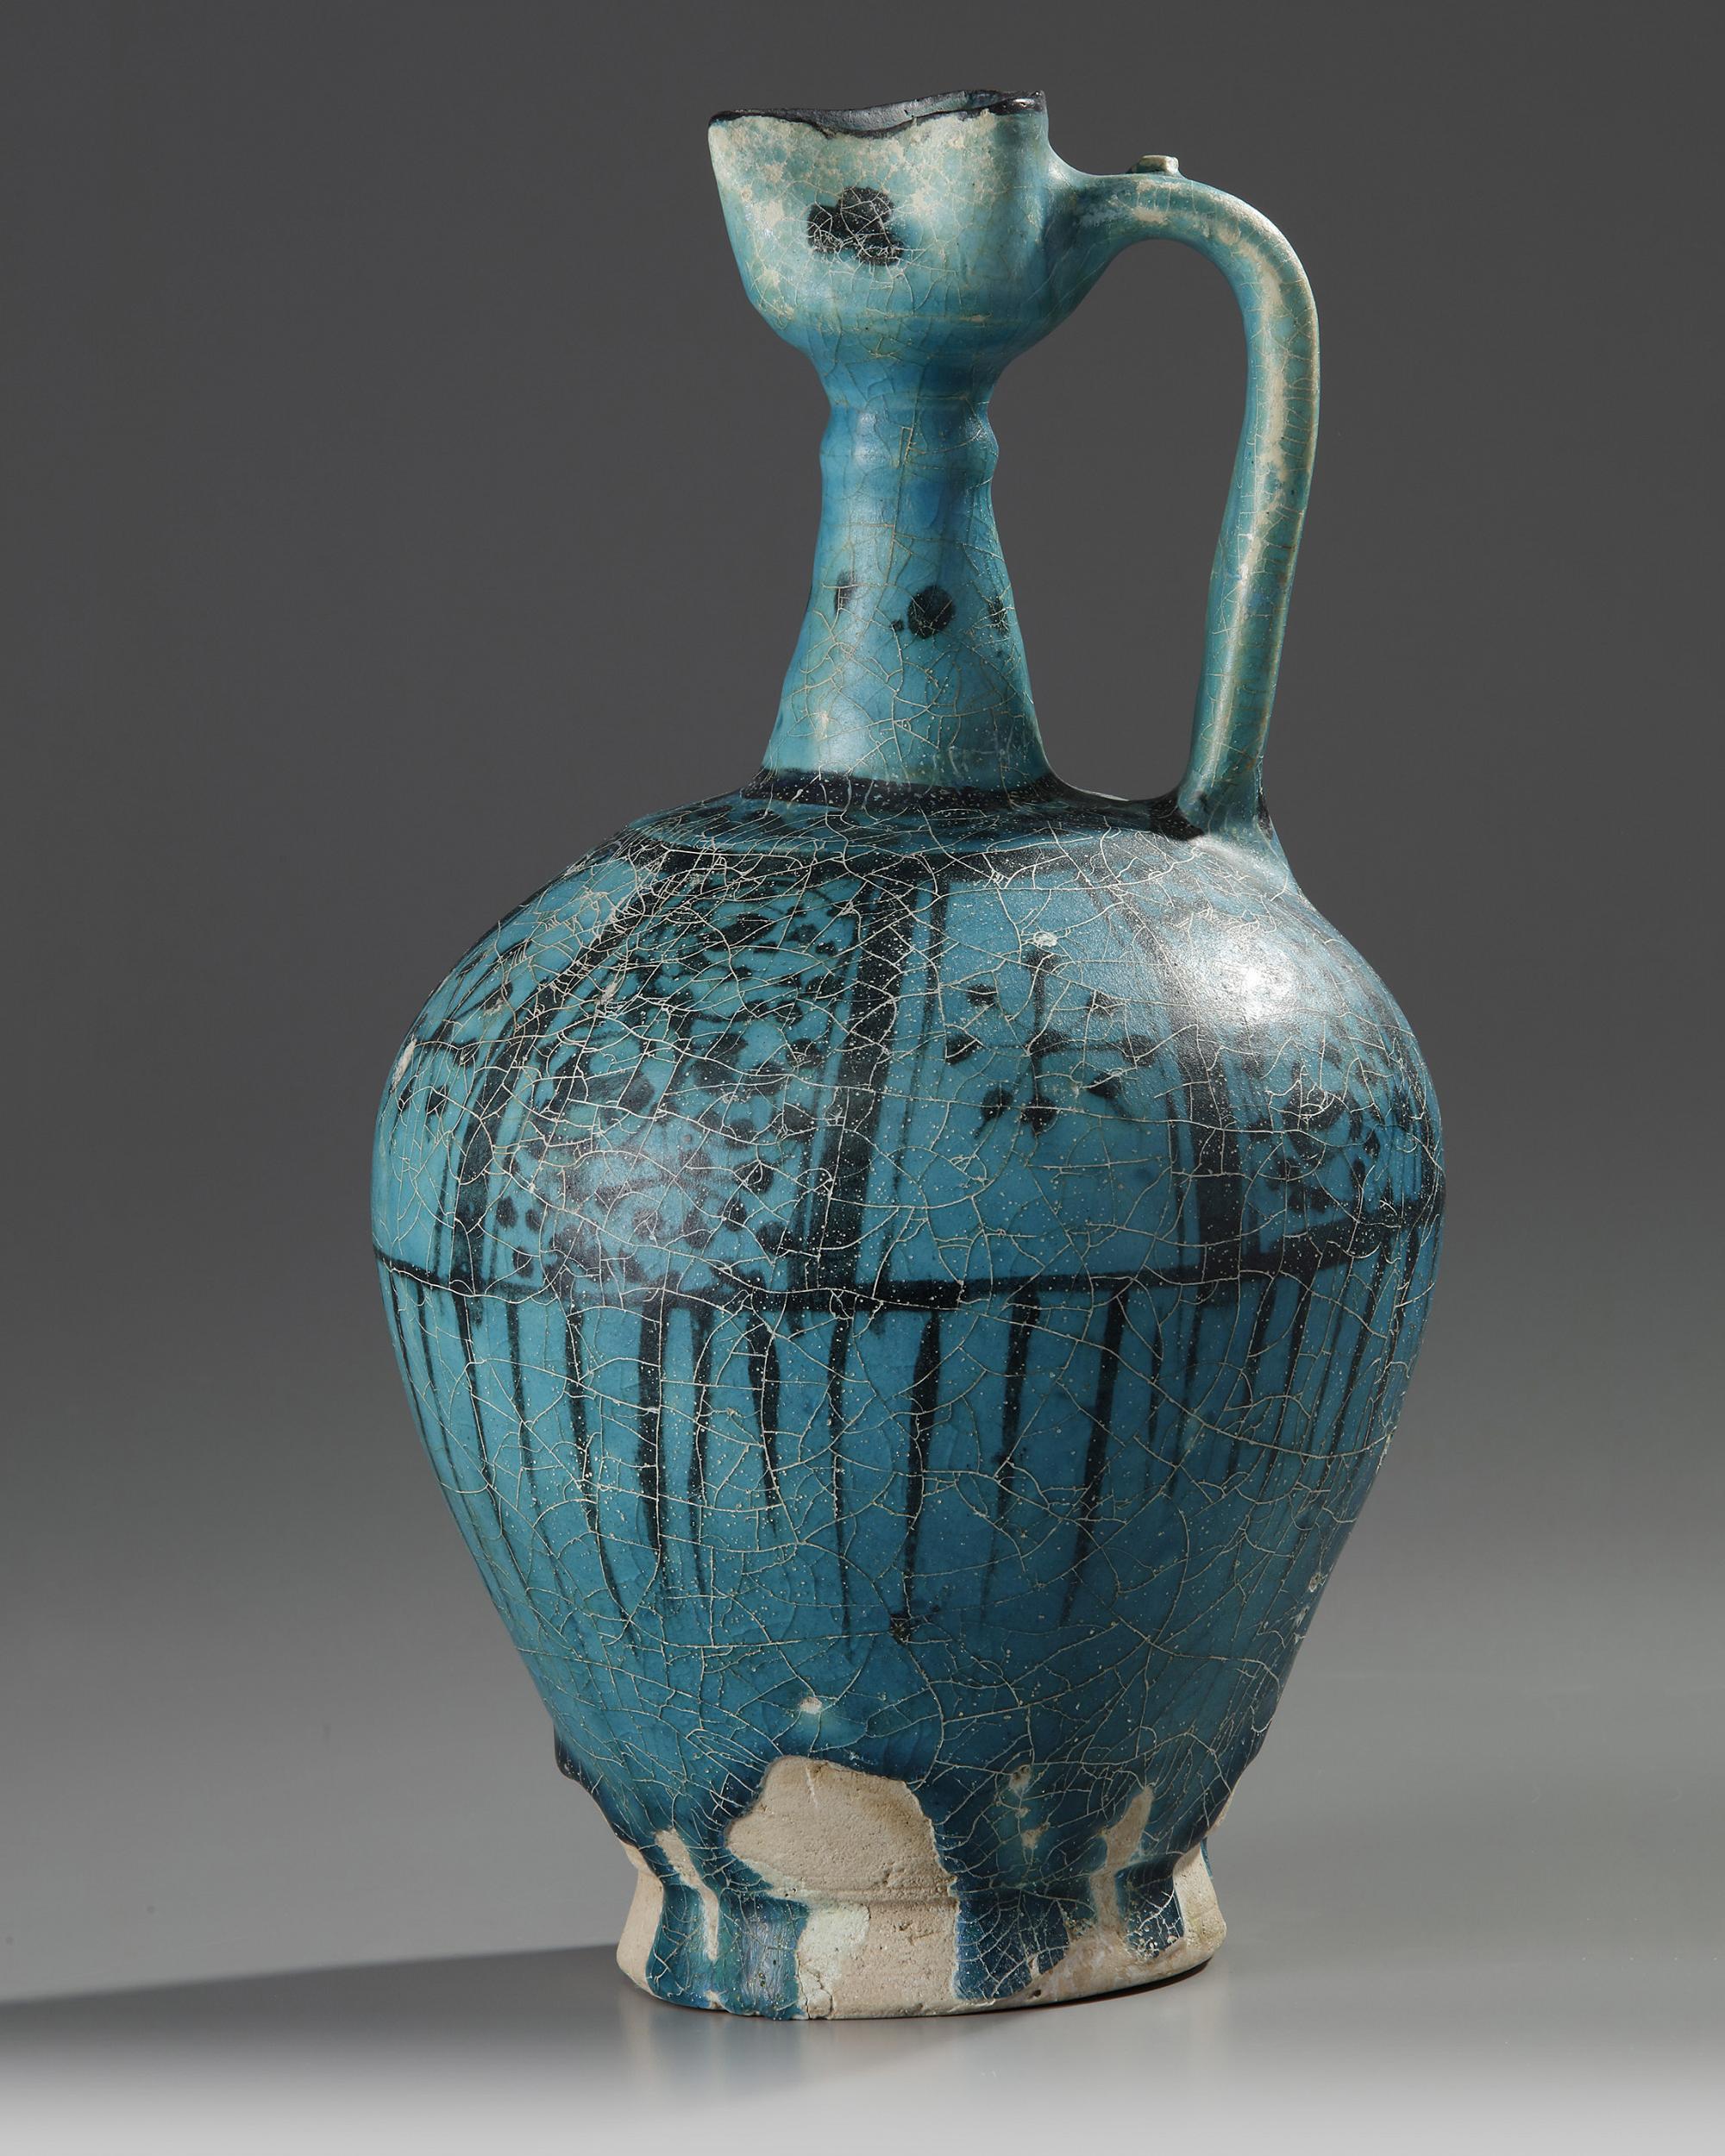 A LARGE RAQQA UNDERGLAZE PAINTED POTTERY EWER, SYRIA, 12TH-13TH CENTURY - Image 20 of 20